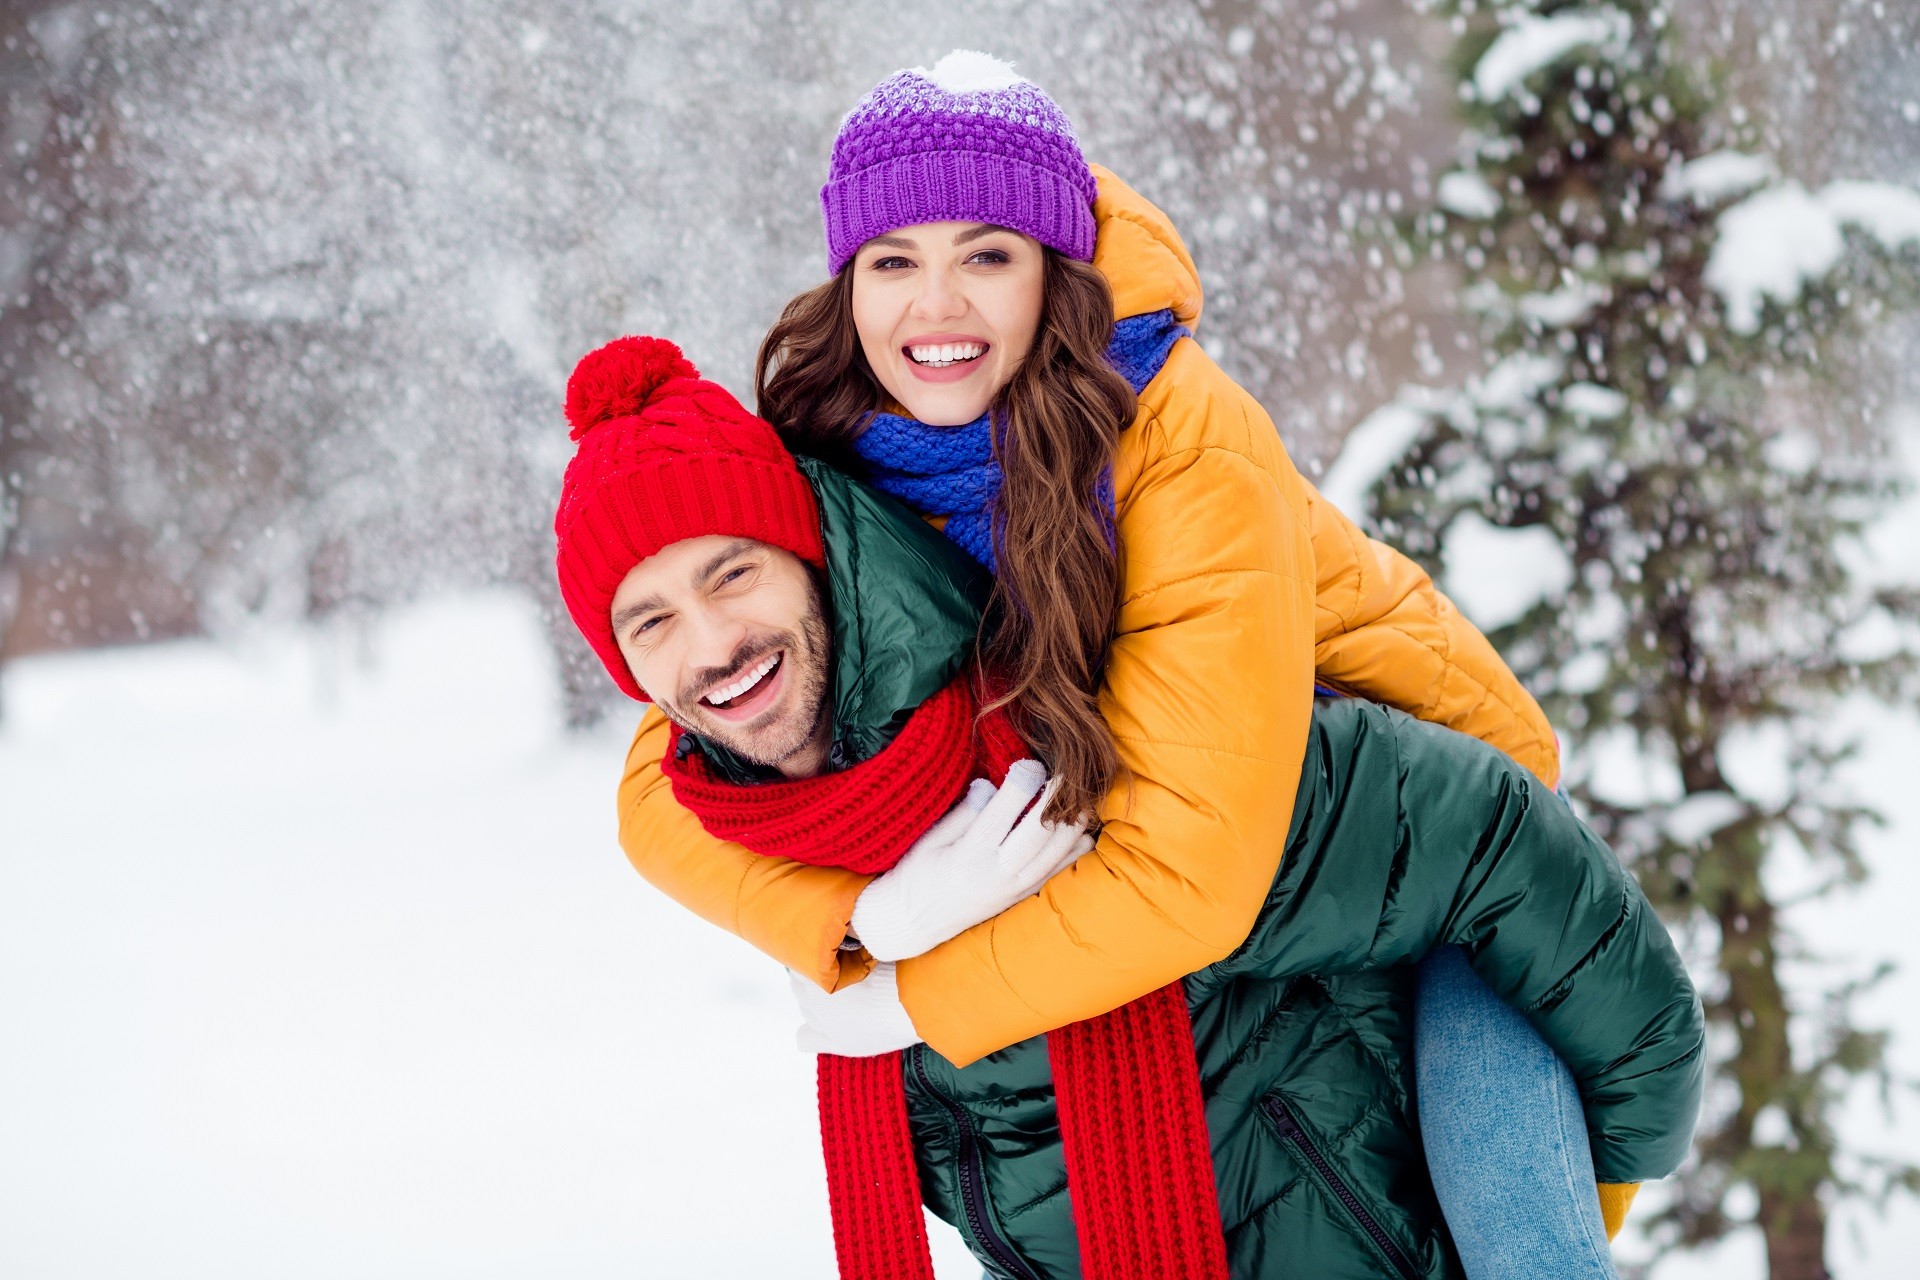 7 Easy Ways to Stay Healthy and Fit This Winter